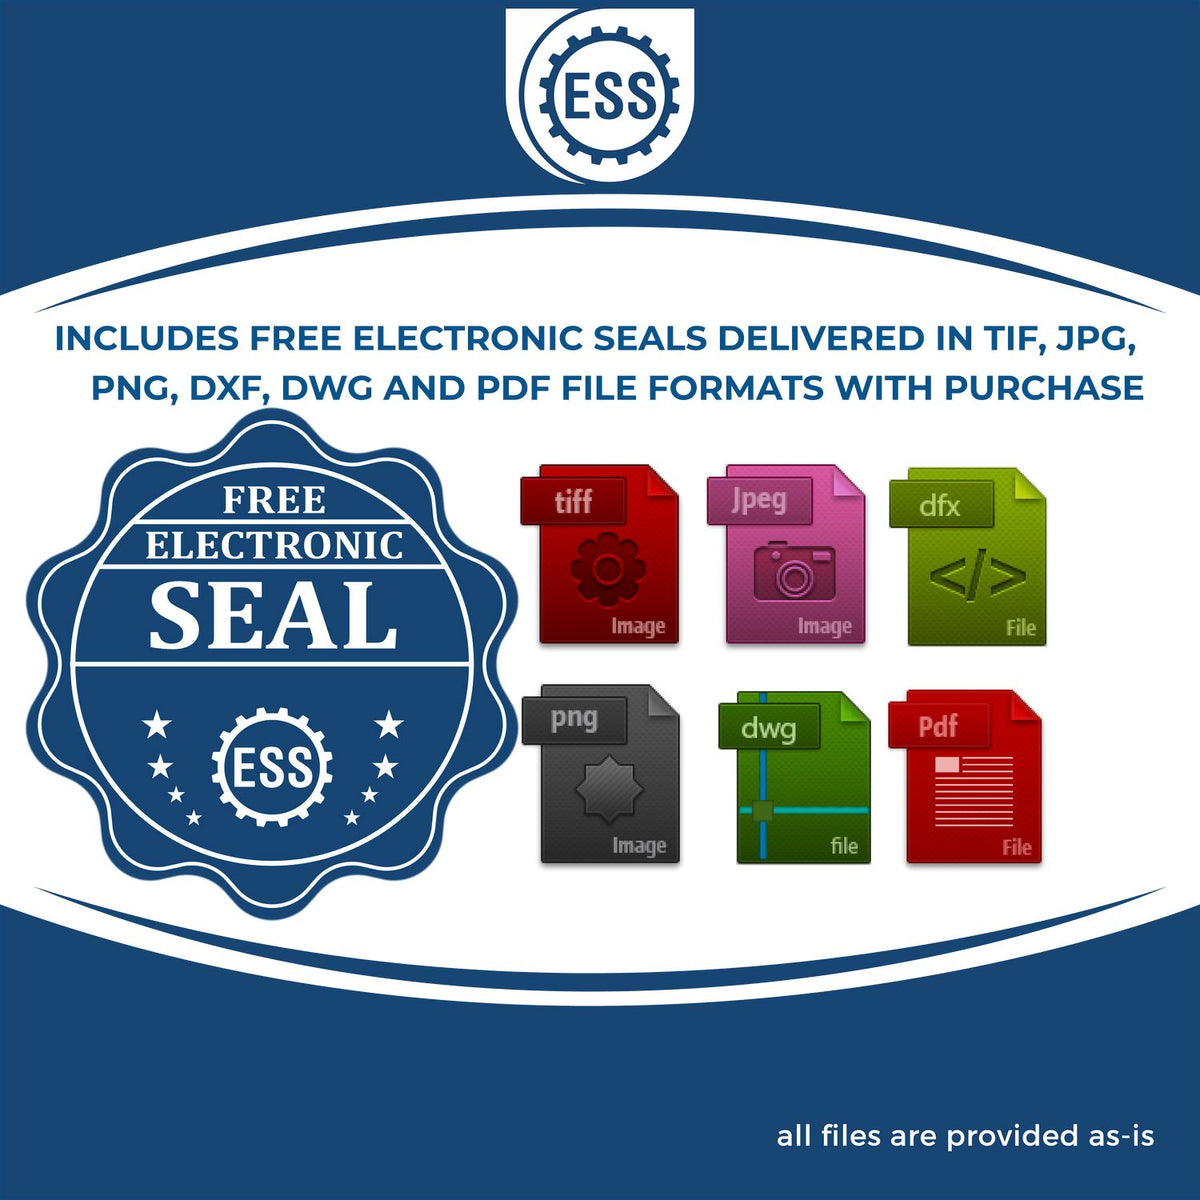 An infographic for the free electronic seal for the Heavy-Duty Louisiana Rectangular Notary Stamp illustrating the different file type icons such as DXF, DWG, TIF, JPG and PNG.